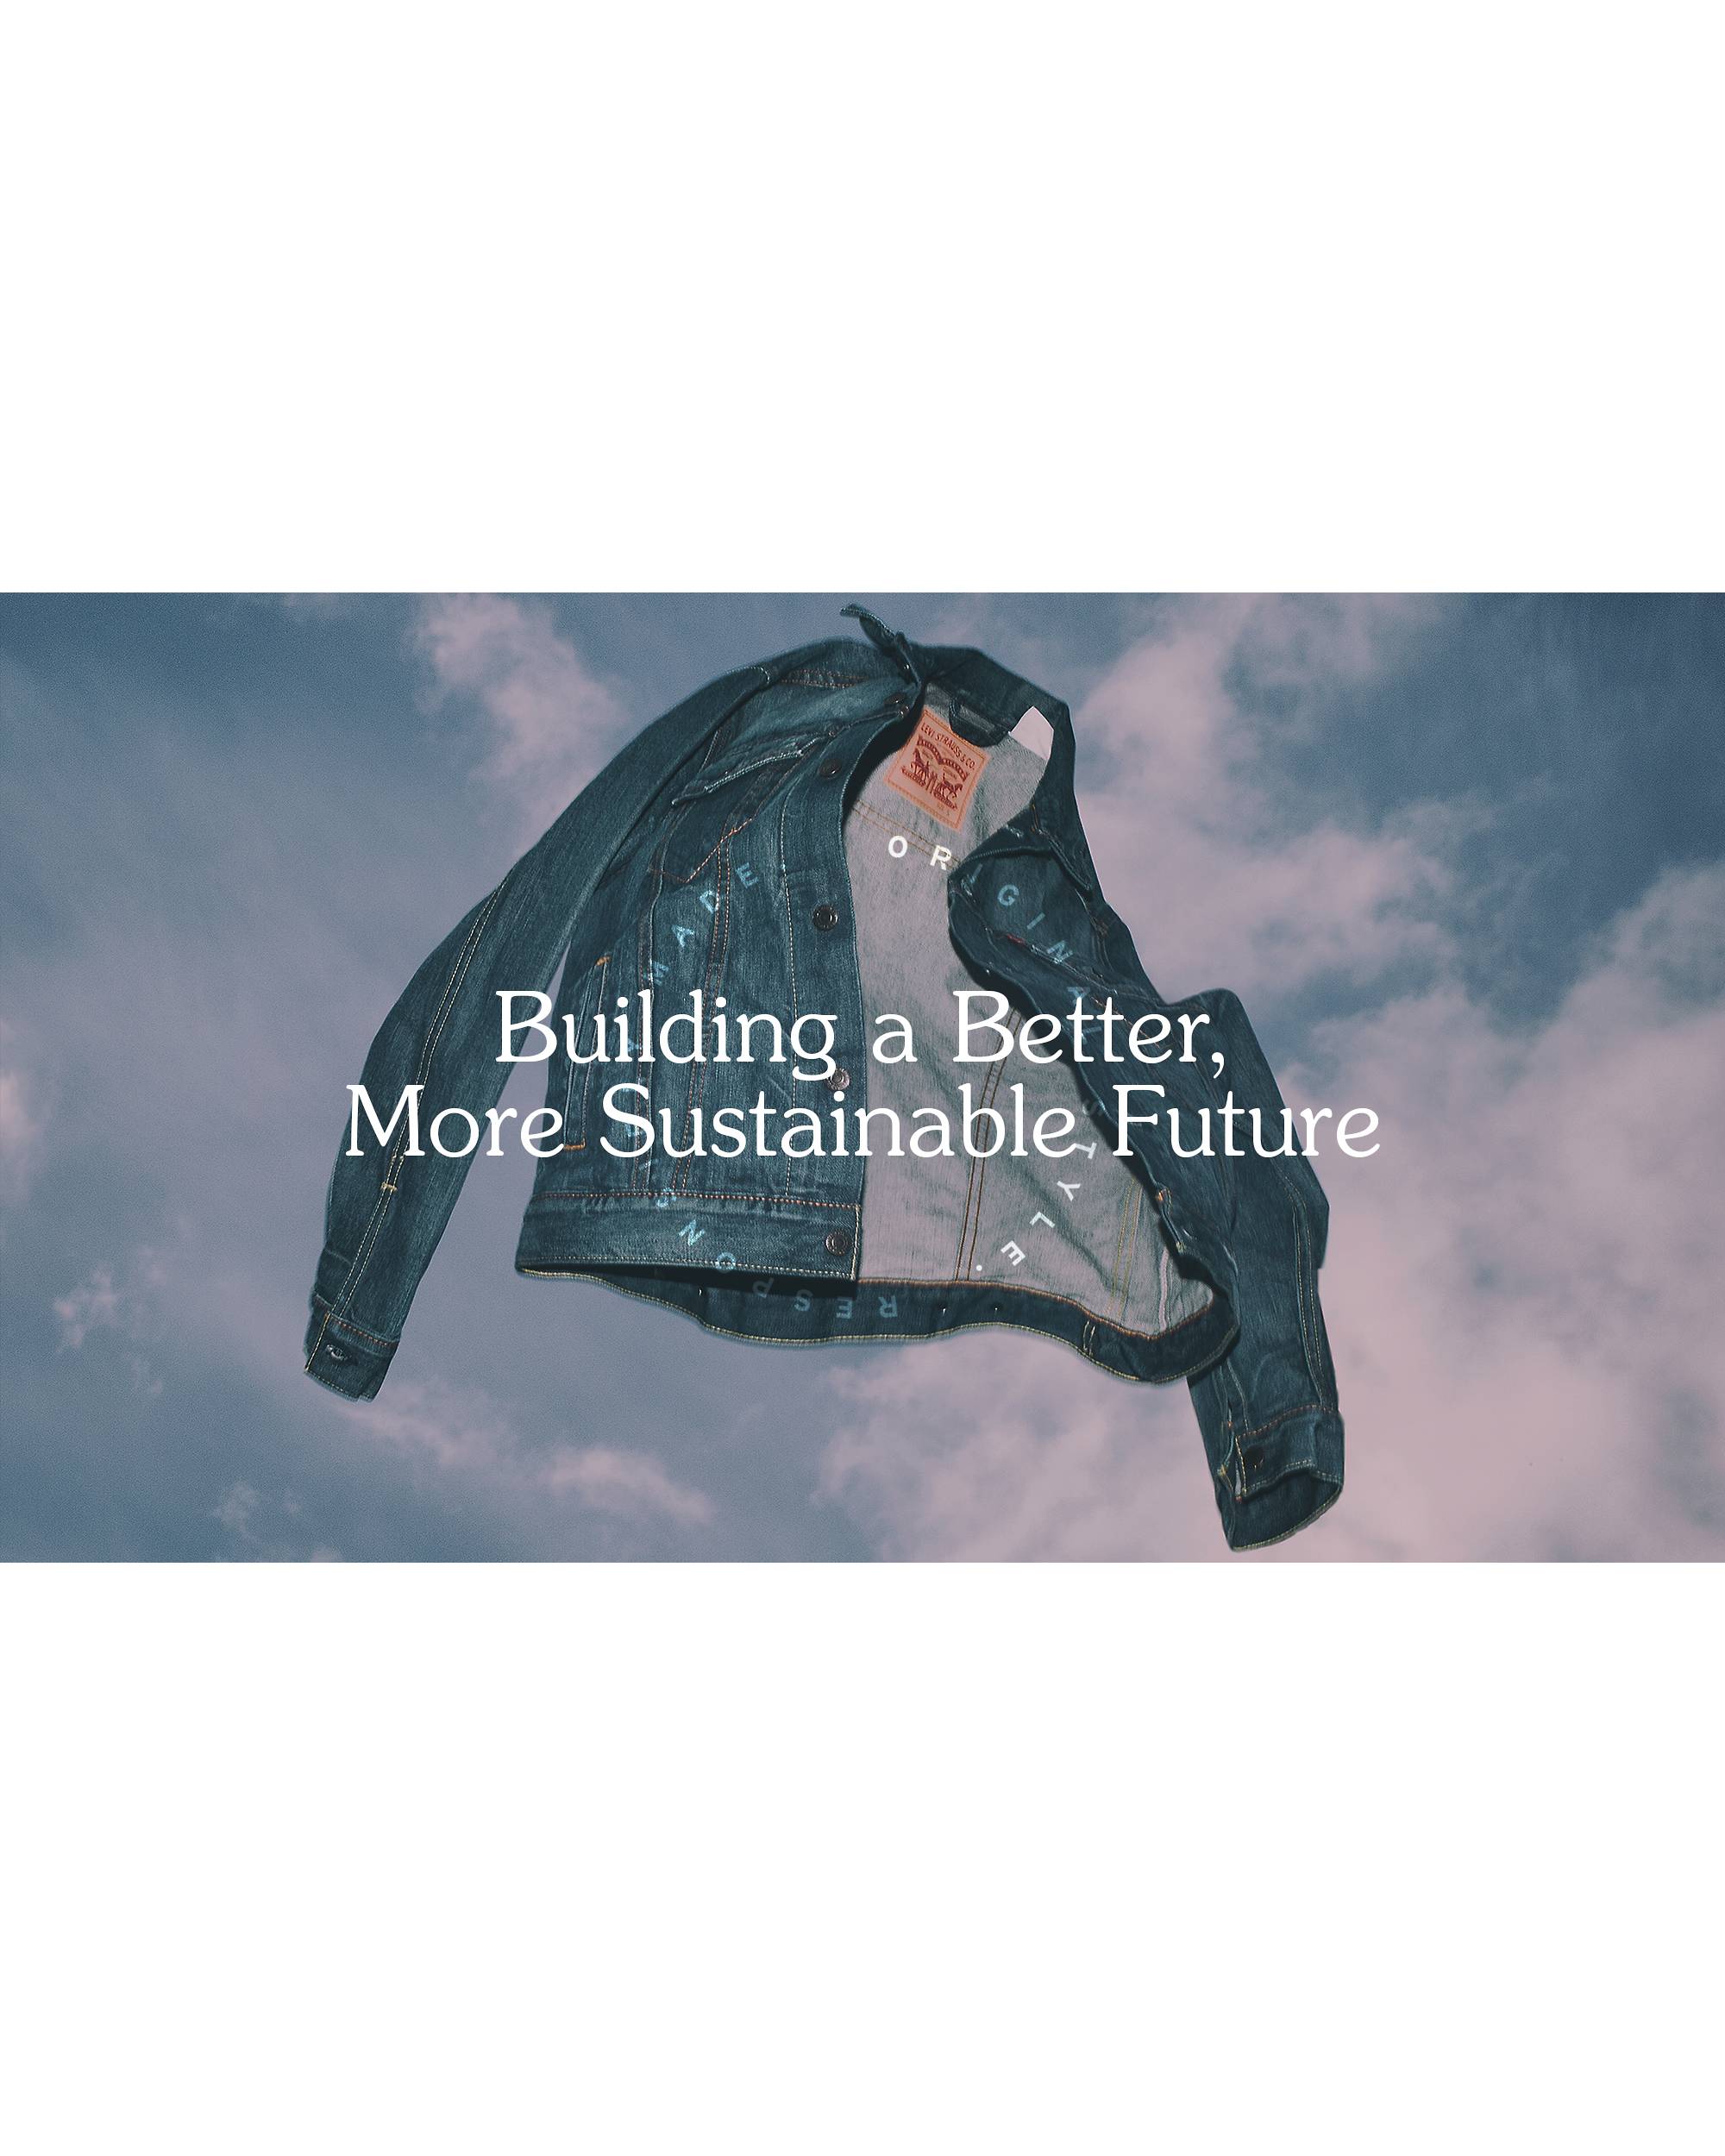 Building a Better, More Sustainable Future